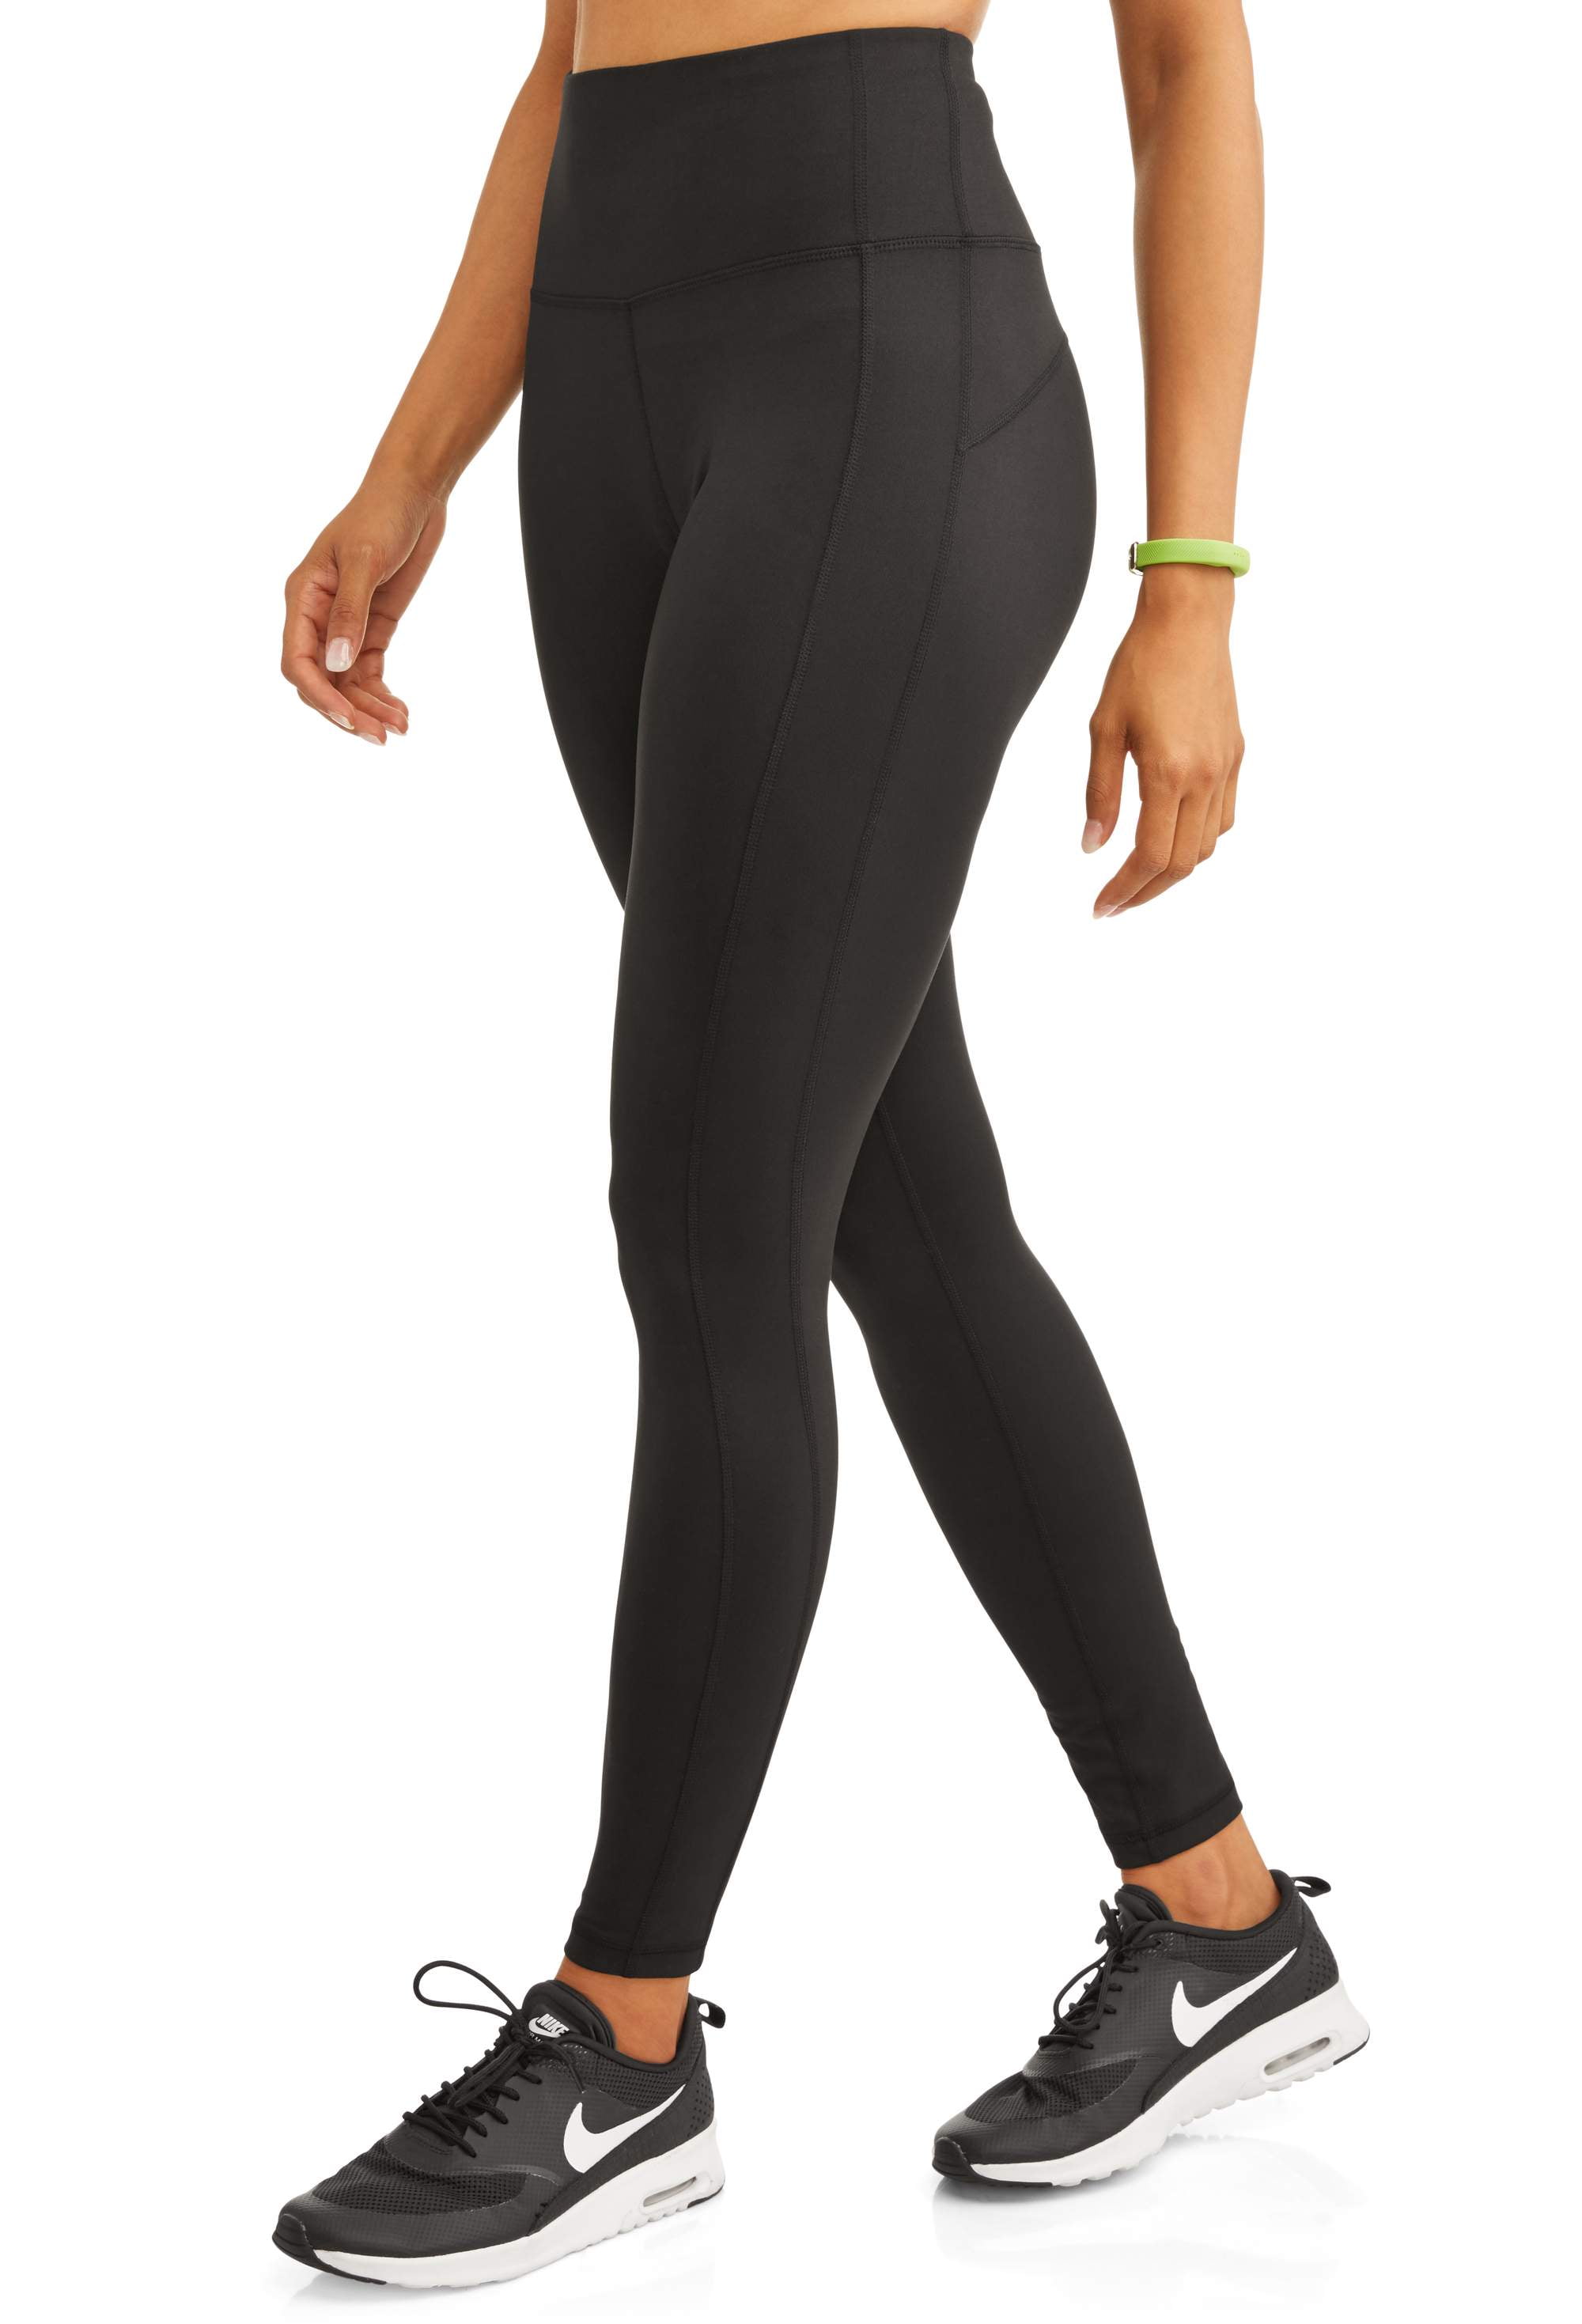 Women's Performance Leggings - WITH POCKET - (up to 3XL - size 18